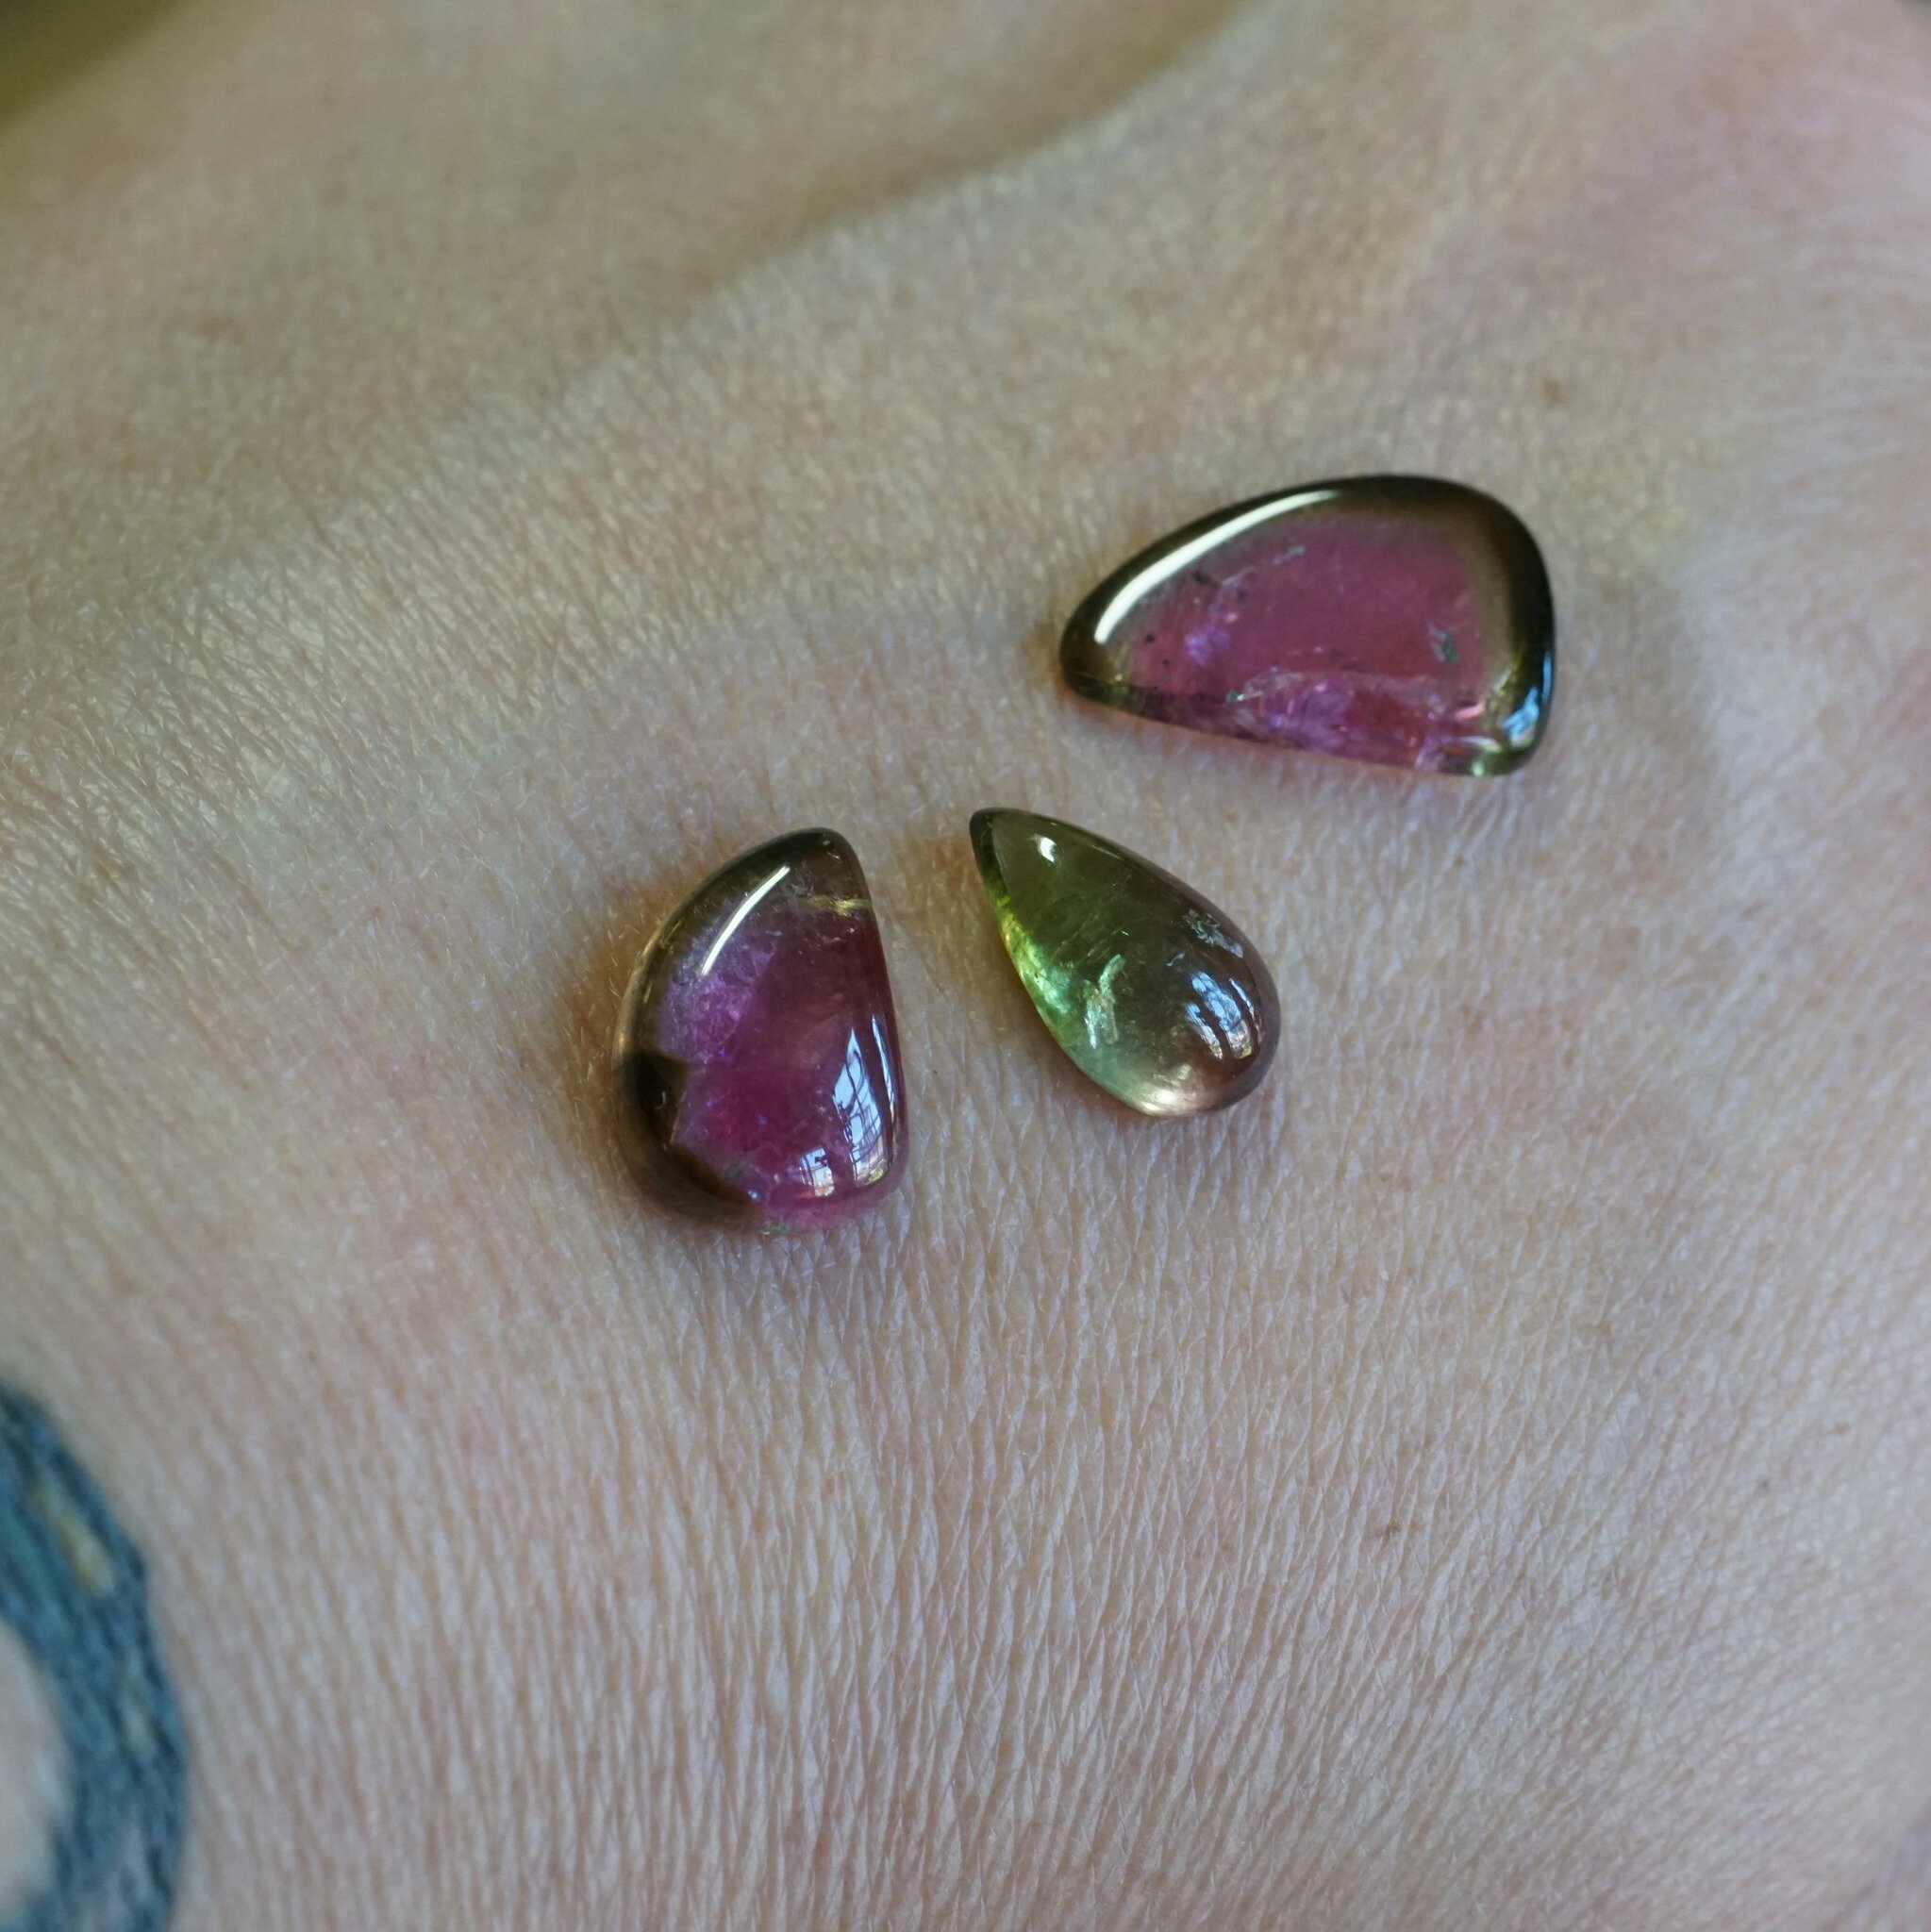 How we look when we see each other. 

For what feels like too long I have been waiting to post these gemstones. I got this set from @tatumgems in early December. 

First I thought I would post when Christmas was canceled in Bethlehem, ICJ case, 150 d